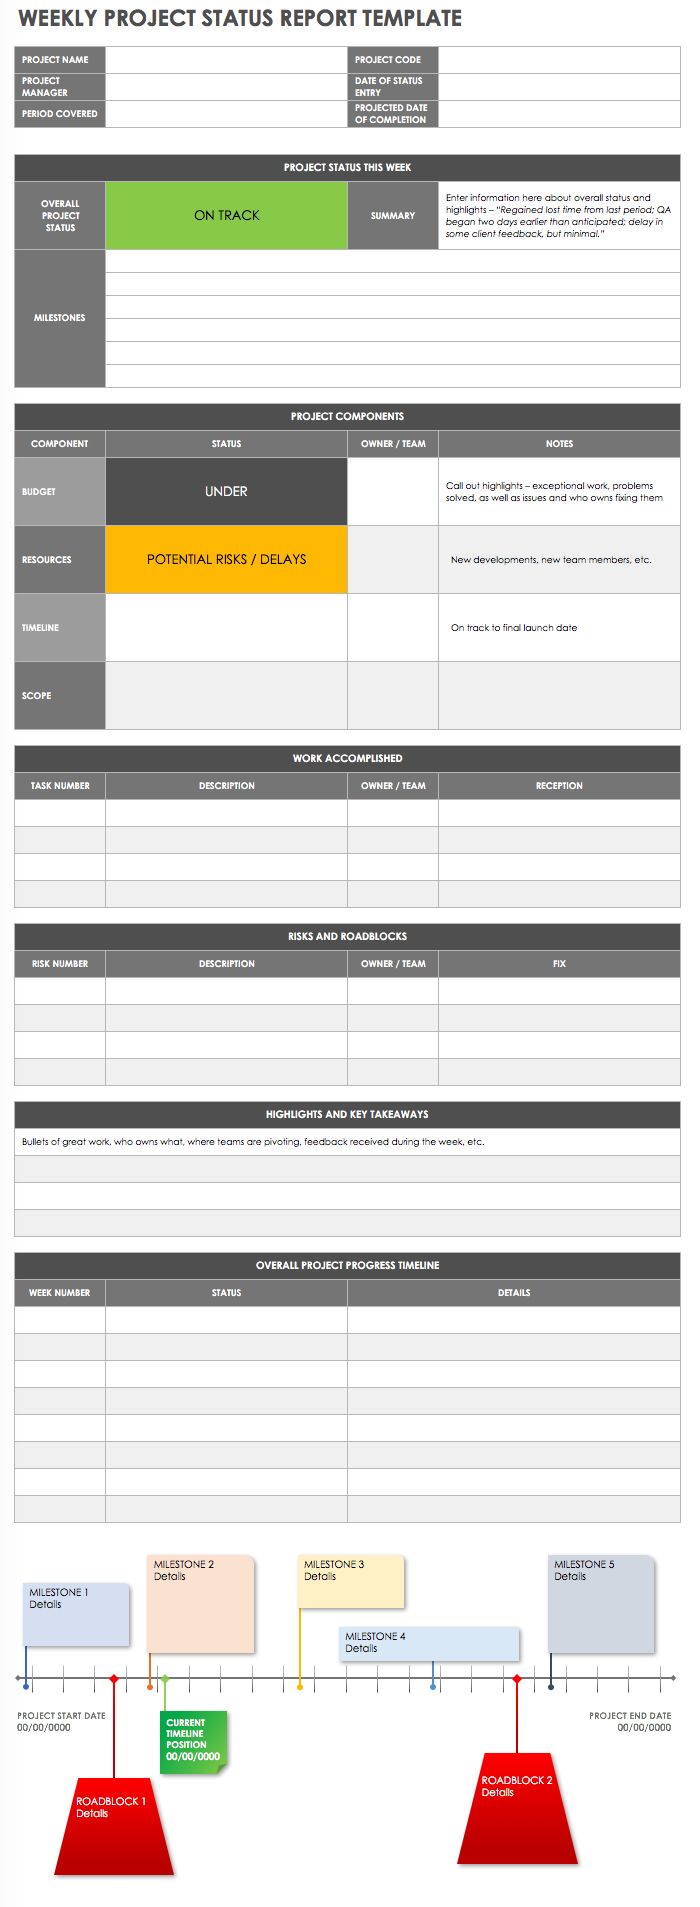 All about Project Status Reports Smartsheet For Software Testing Weekly Status Report Template